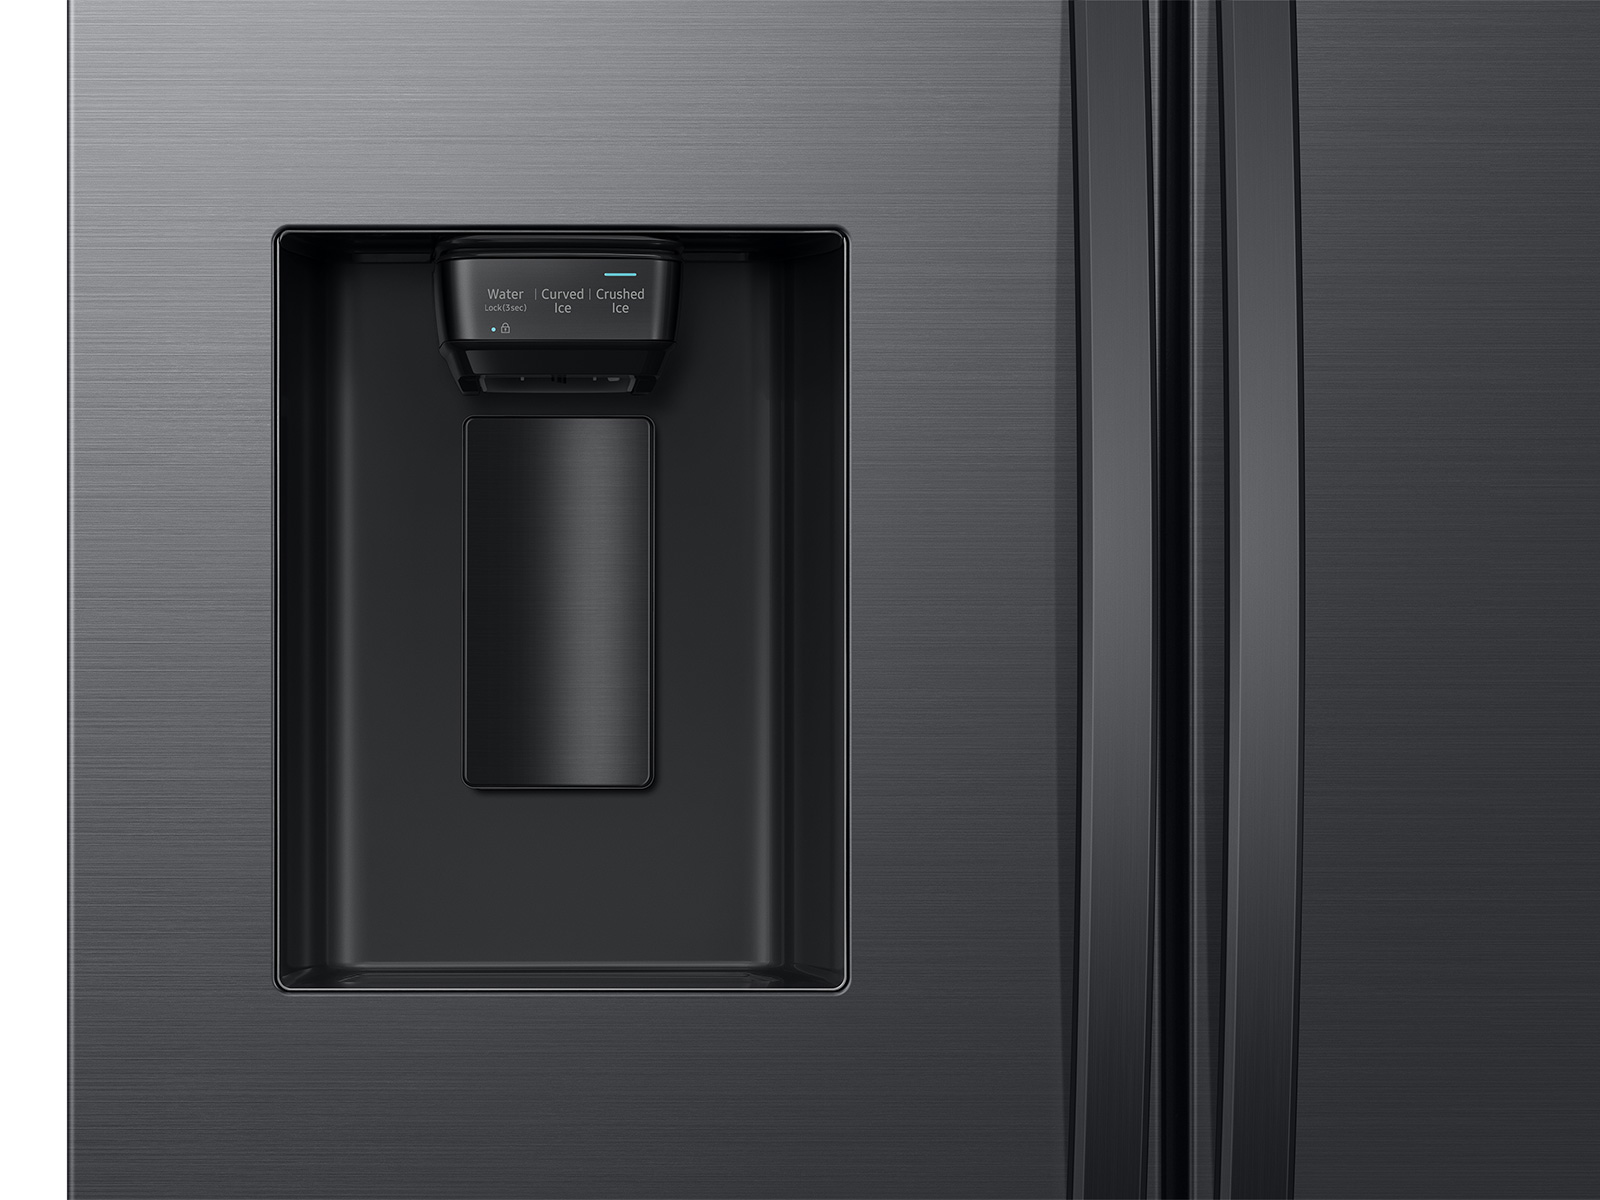 Thumbnail image of 31 cu. ft. Mega Capacity 3-Door French Door Refrigerator with Four Types of Ice in Matte Black Steel